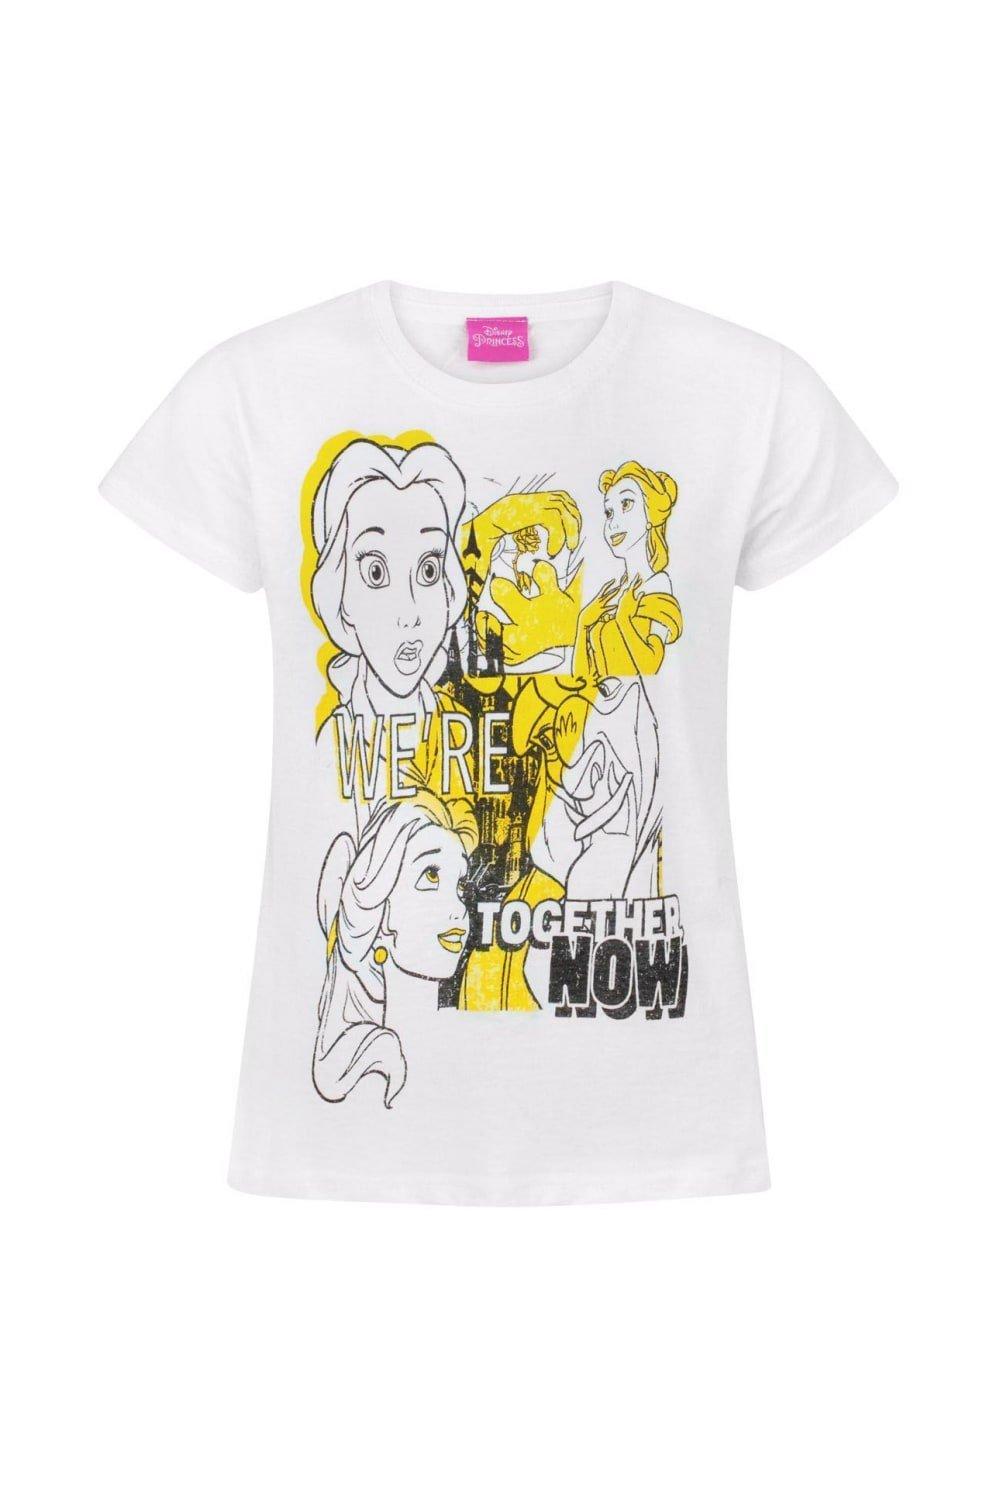 We Are Together Now Belle T-Shirt